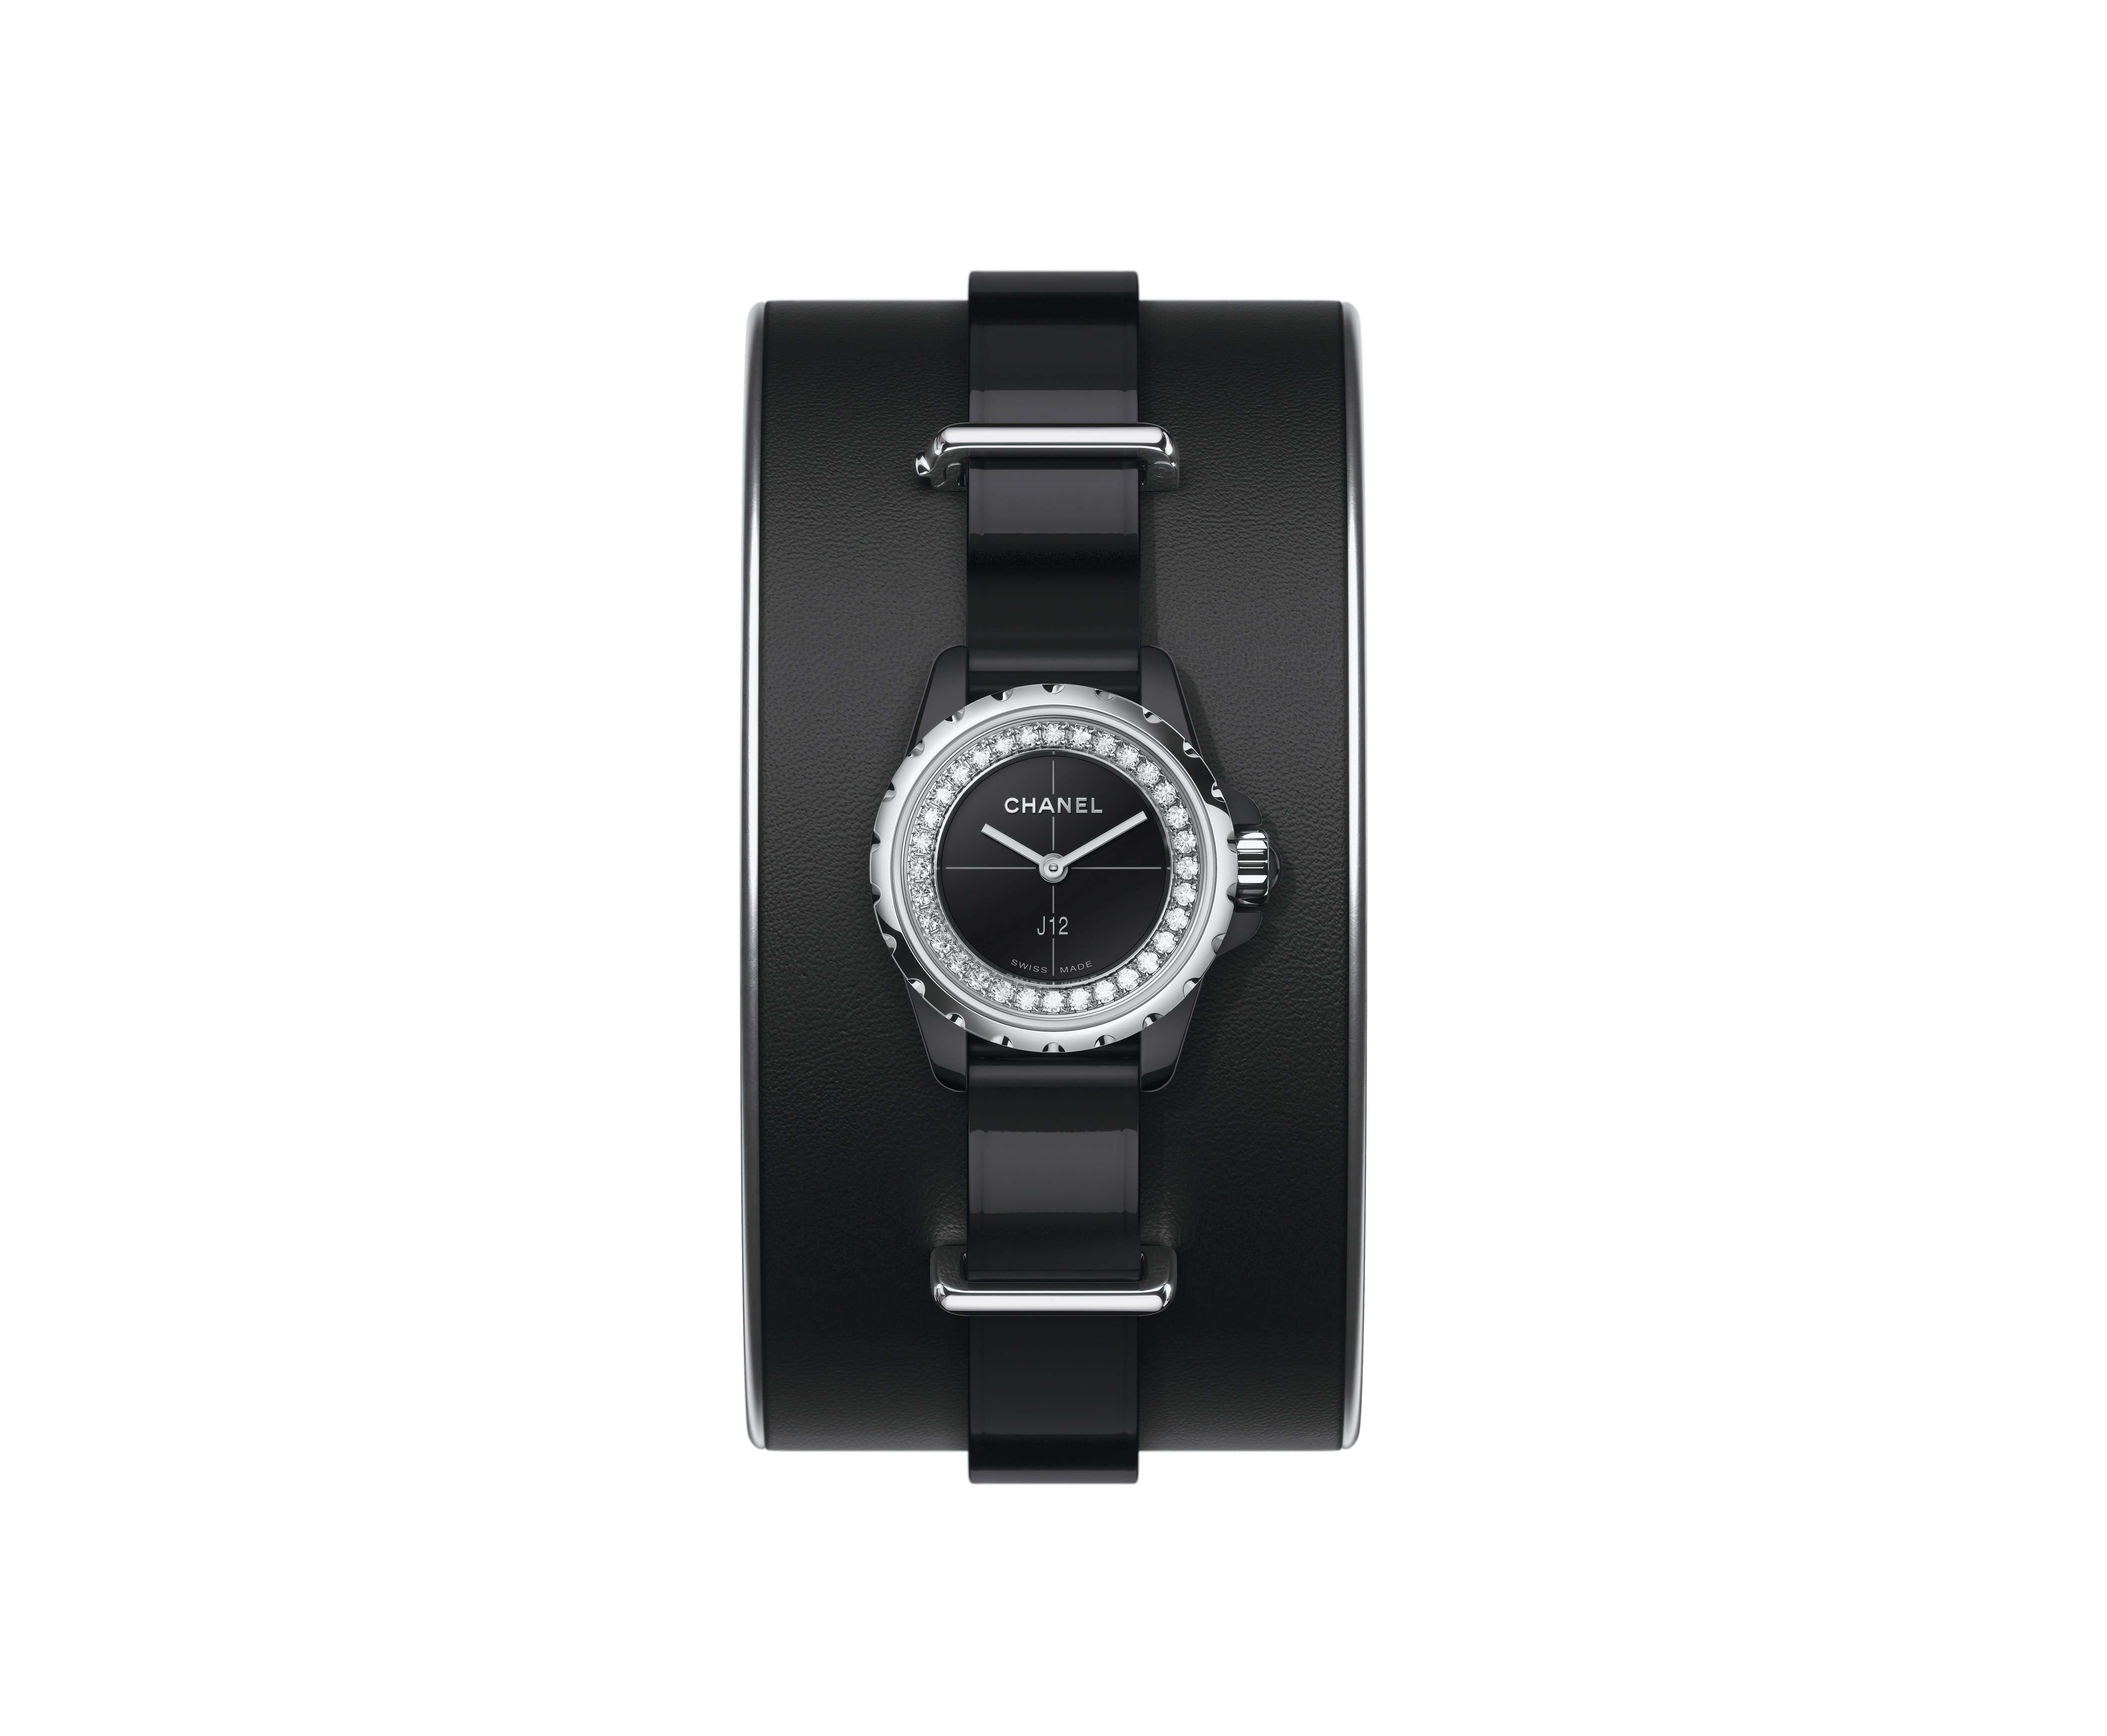 Chanel's J12.XS watch can be worn with its patent leather strap, or can be paired with a calfskin cuff.